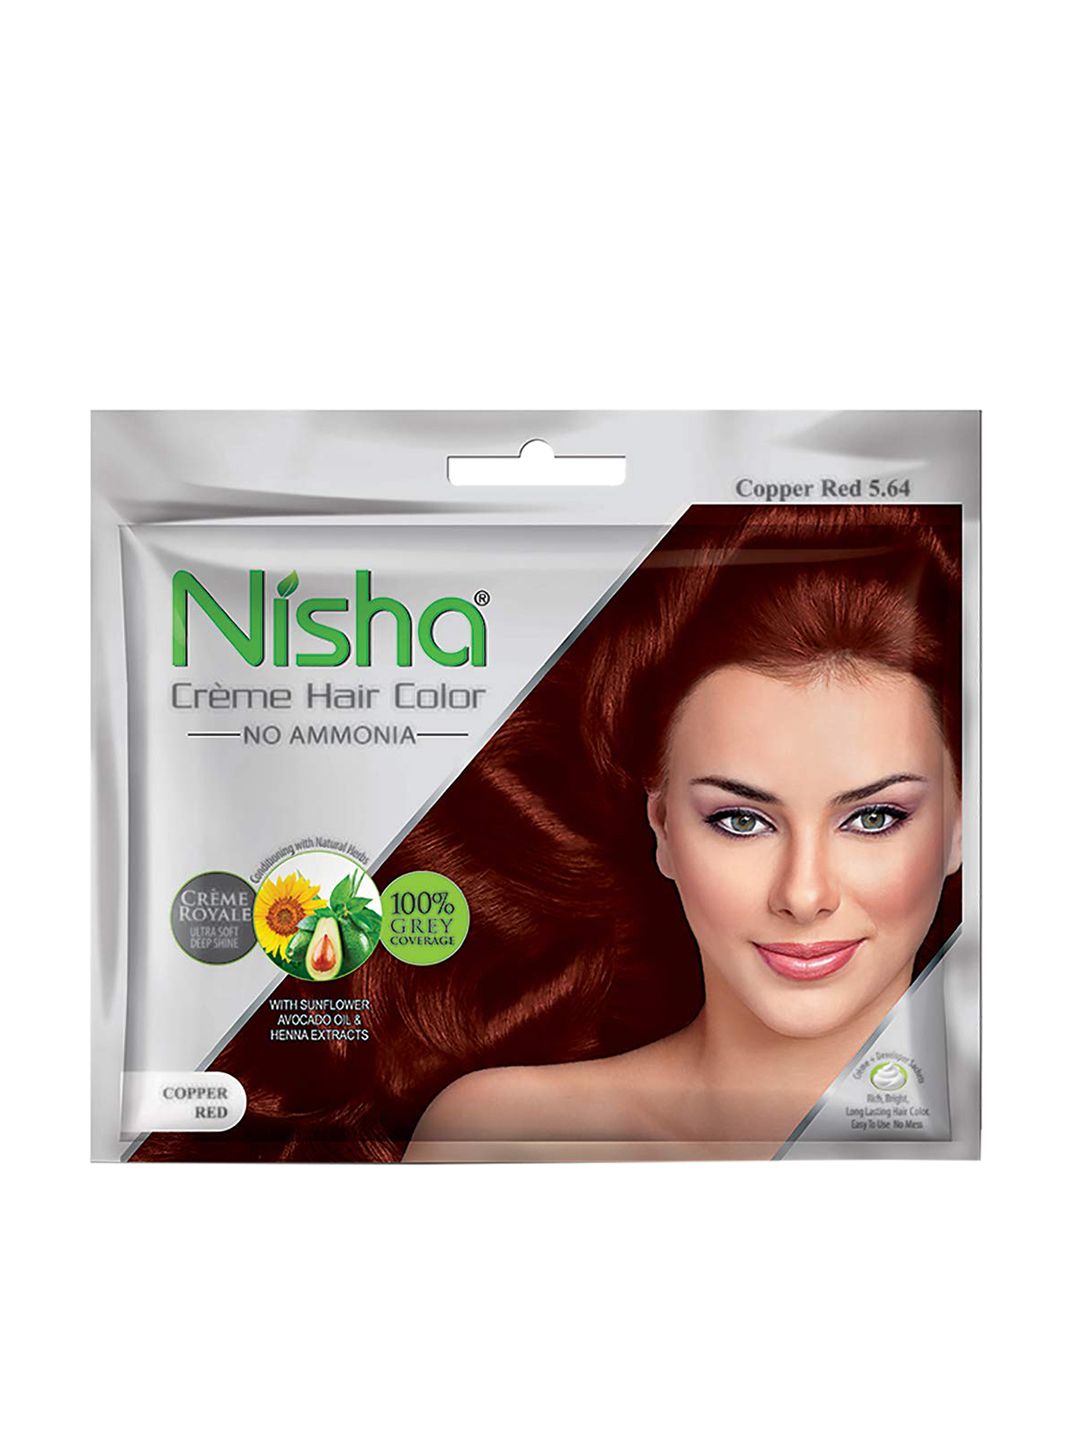 Nisha Pack of 6 Creme Hair Colour 240g - Copper Red Price in India